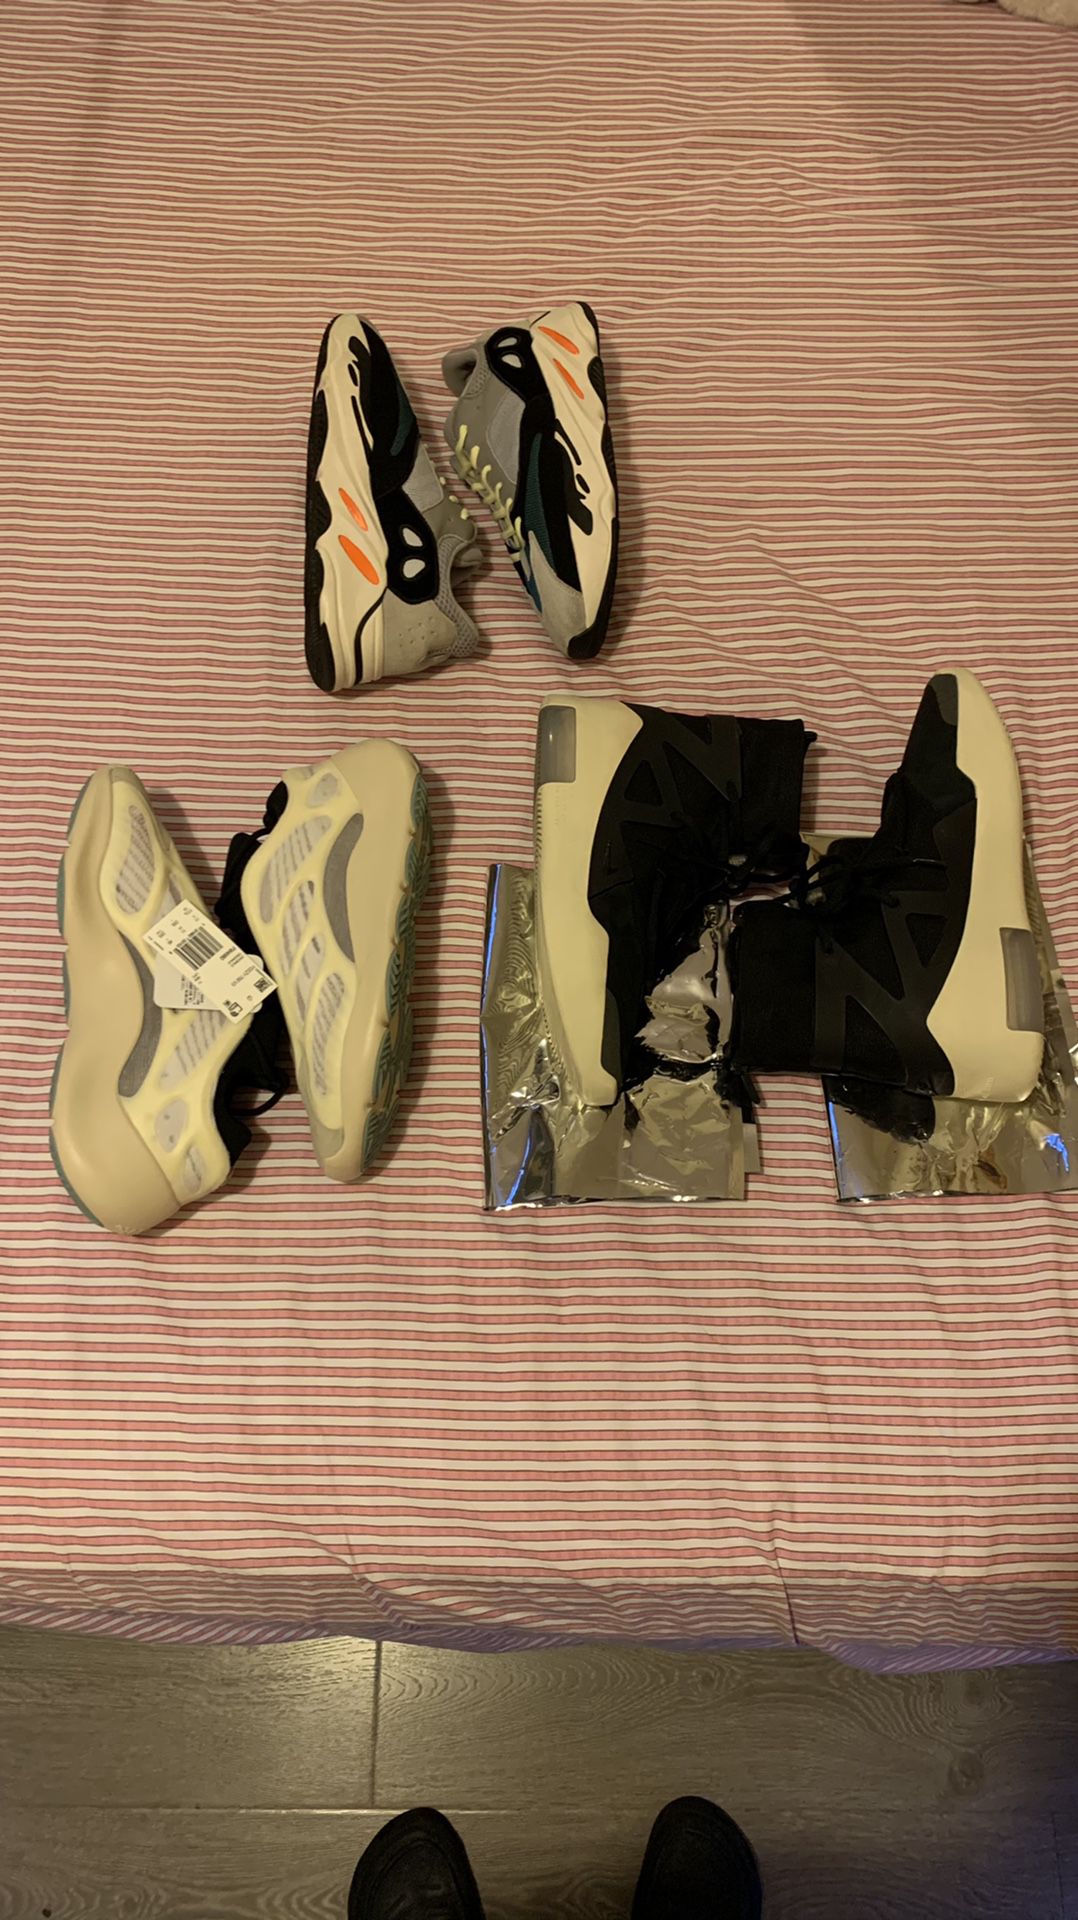 YEEZY BOOTS 700 and Nike fear of god All DS OFFER MEE